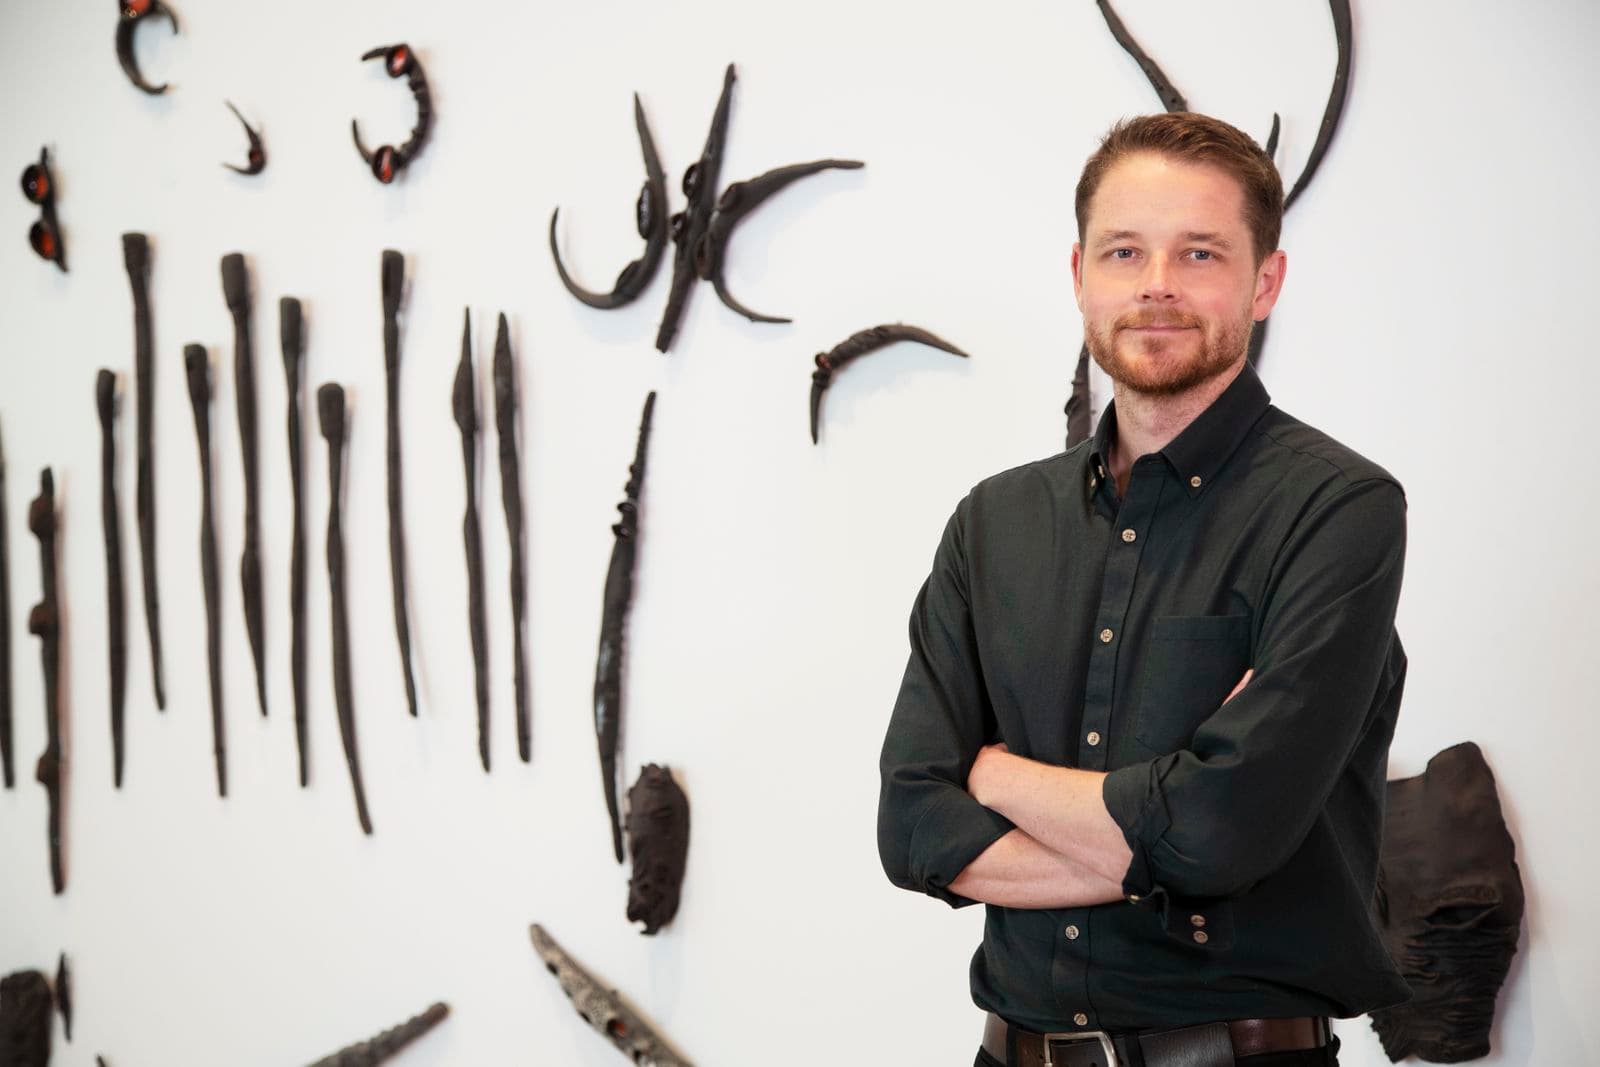 A man stands with his arms crossed in front of a white wall with black ceramic banksia shapes.